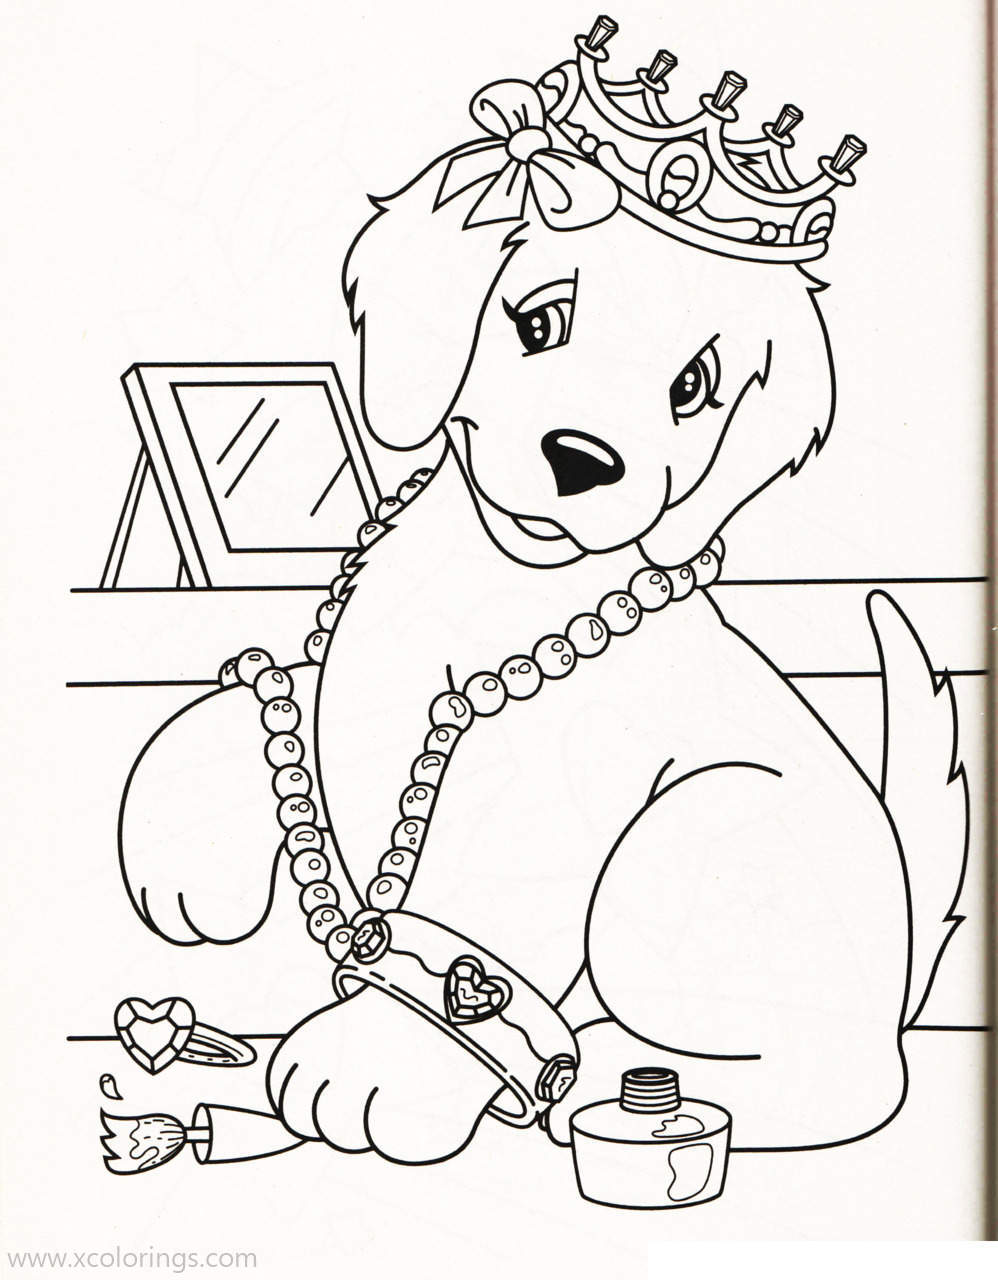 Free Lisa Frank Coloring Pages Casey with Crown printable